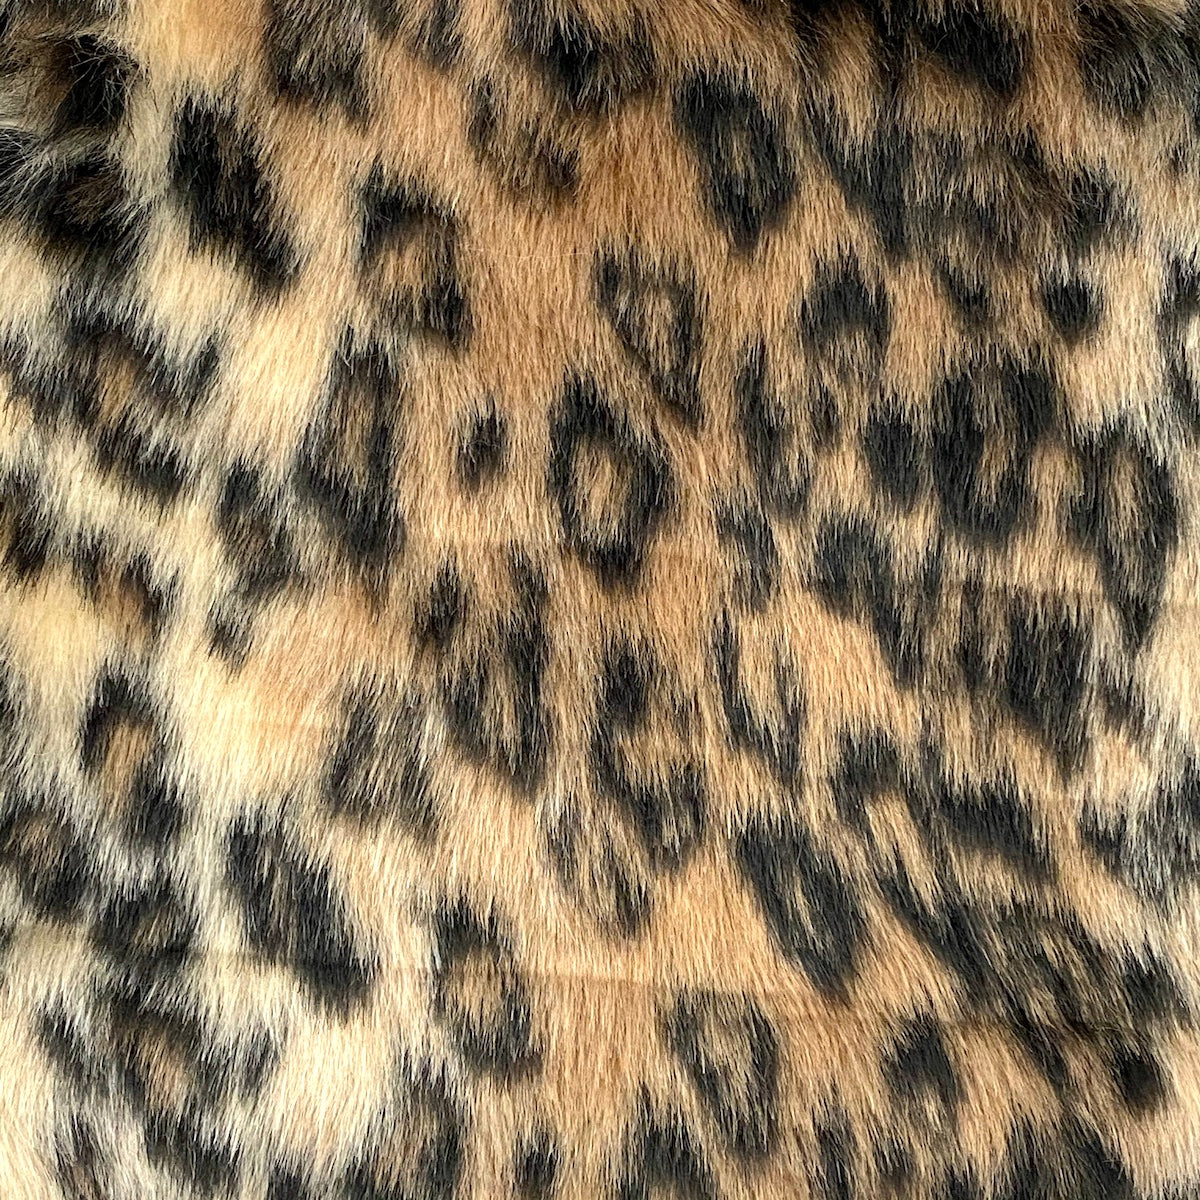 Brown Leopard Print Apparel Home Decor Faux Fur Fabric -Sold By